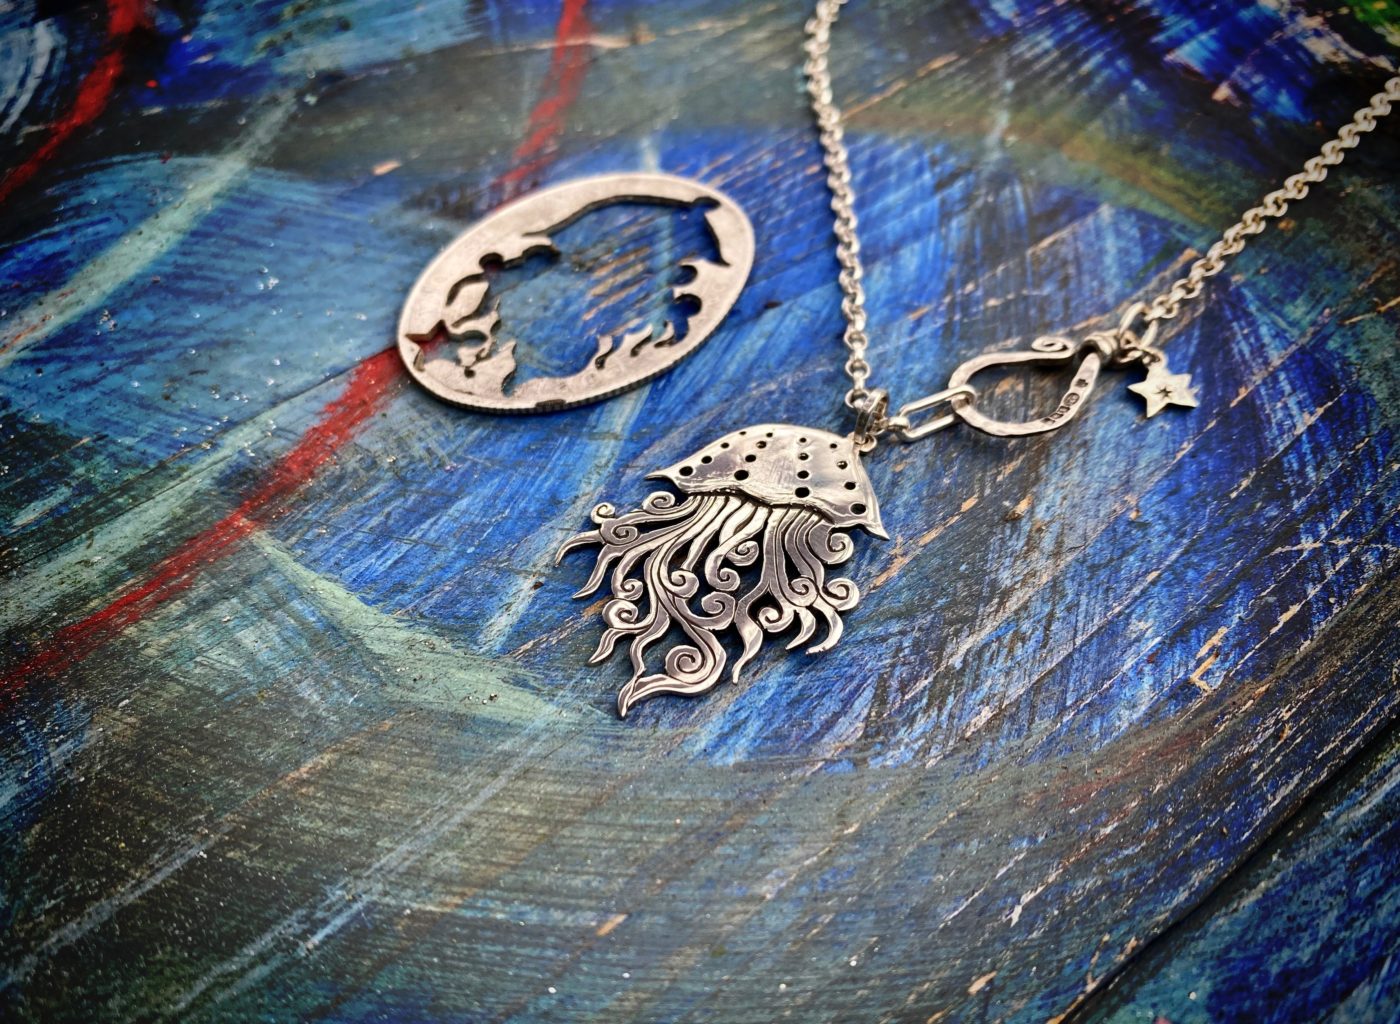 medusa jellyfish jewellery made from ethical repurposed recycled silver coins